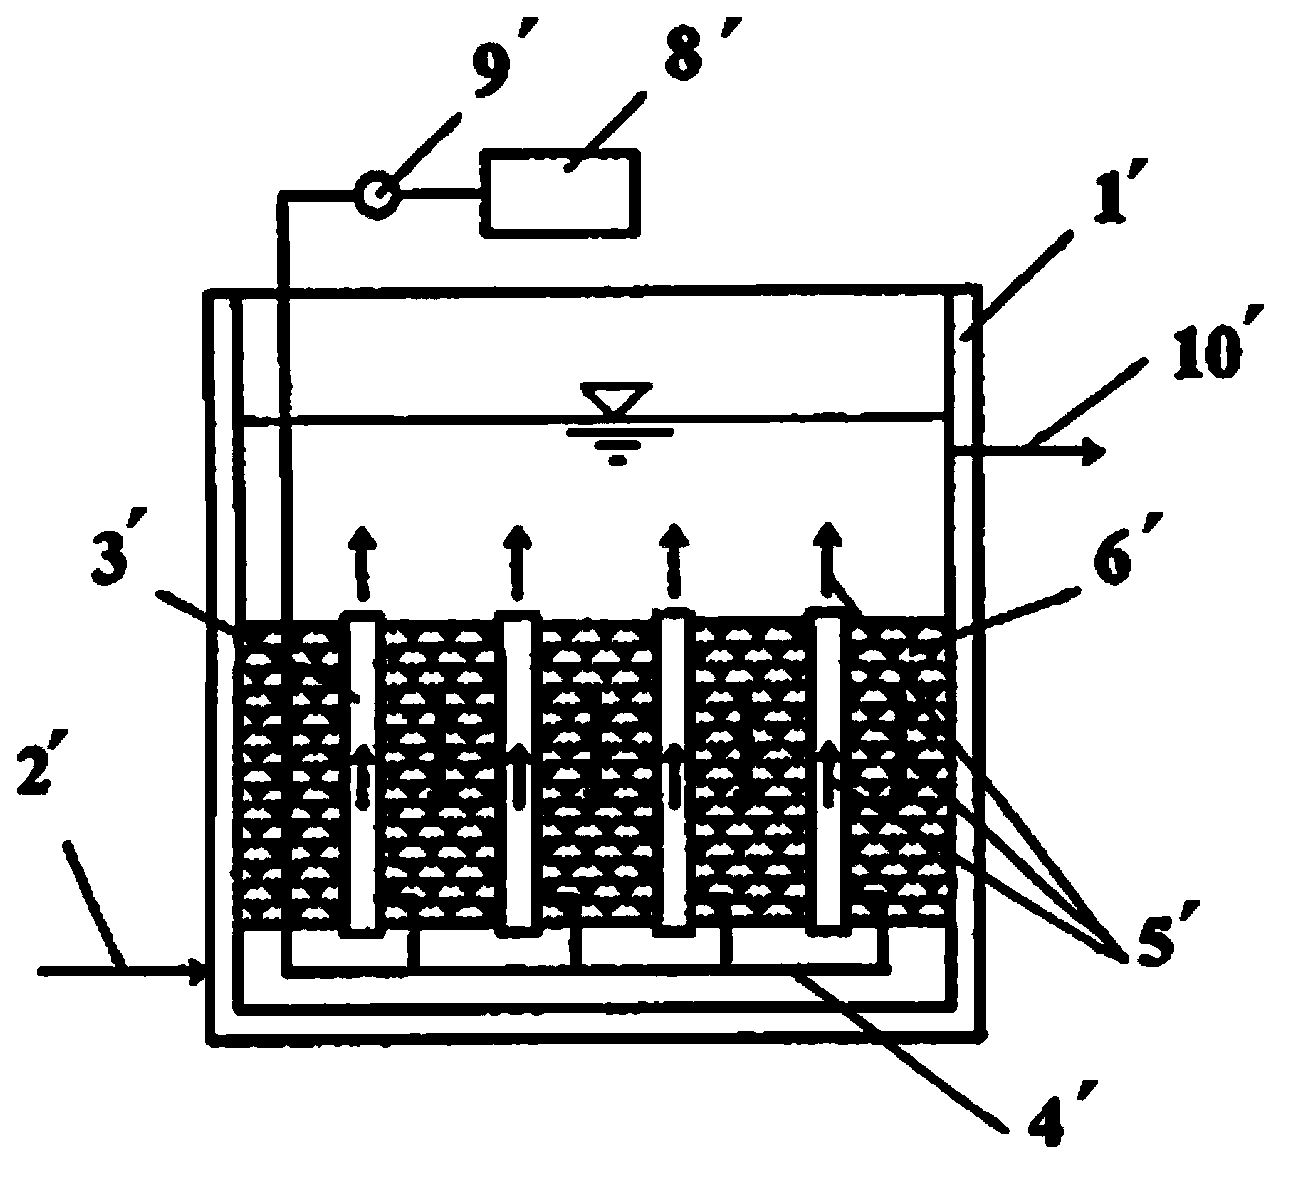 Method for treating and utilizing coal gasification wastewater